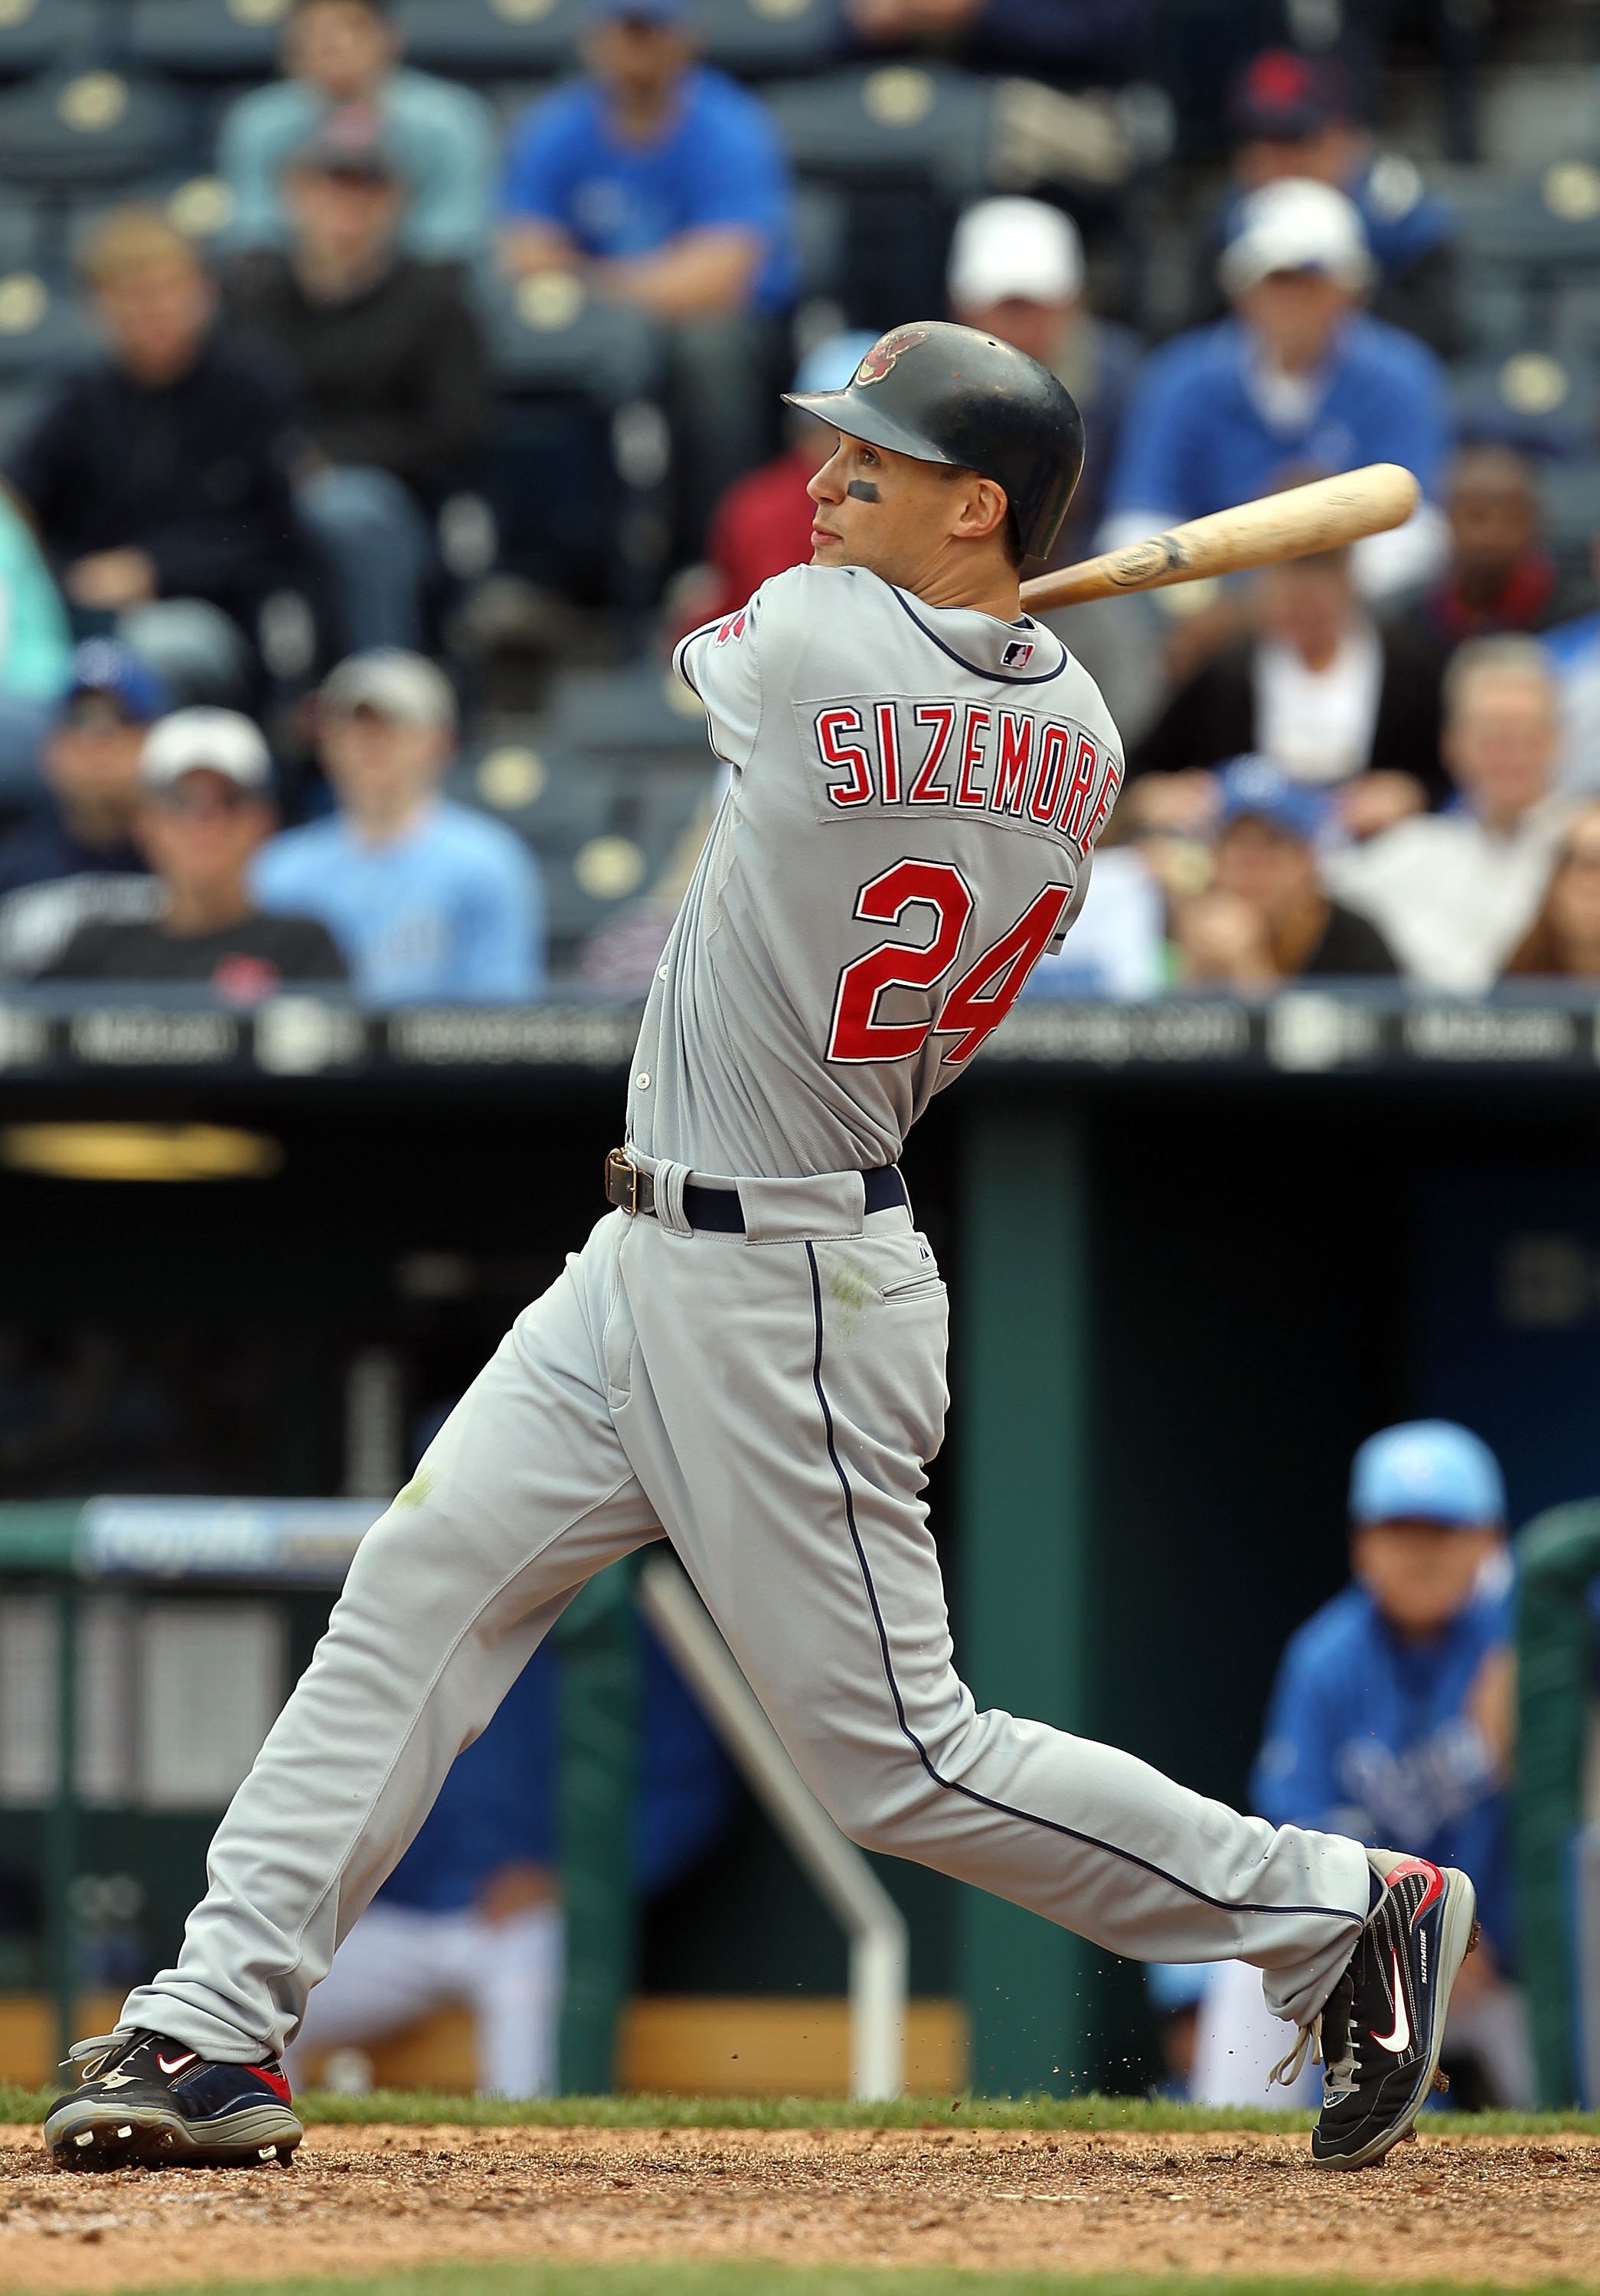 Grady Sizemore will DH on Sunday against Arizona in first game